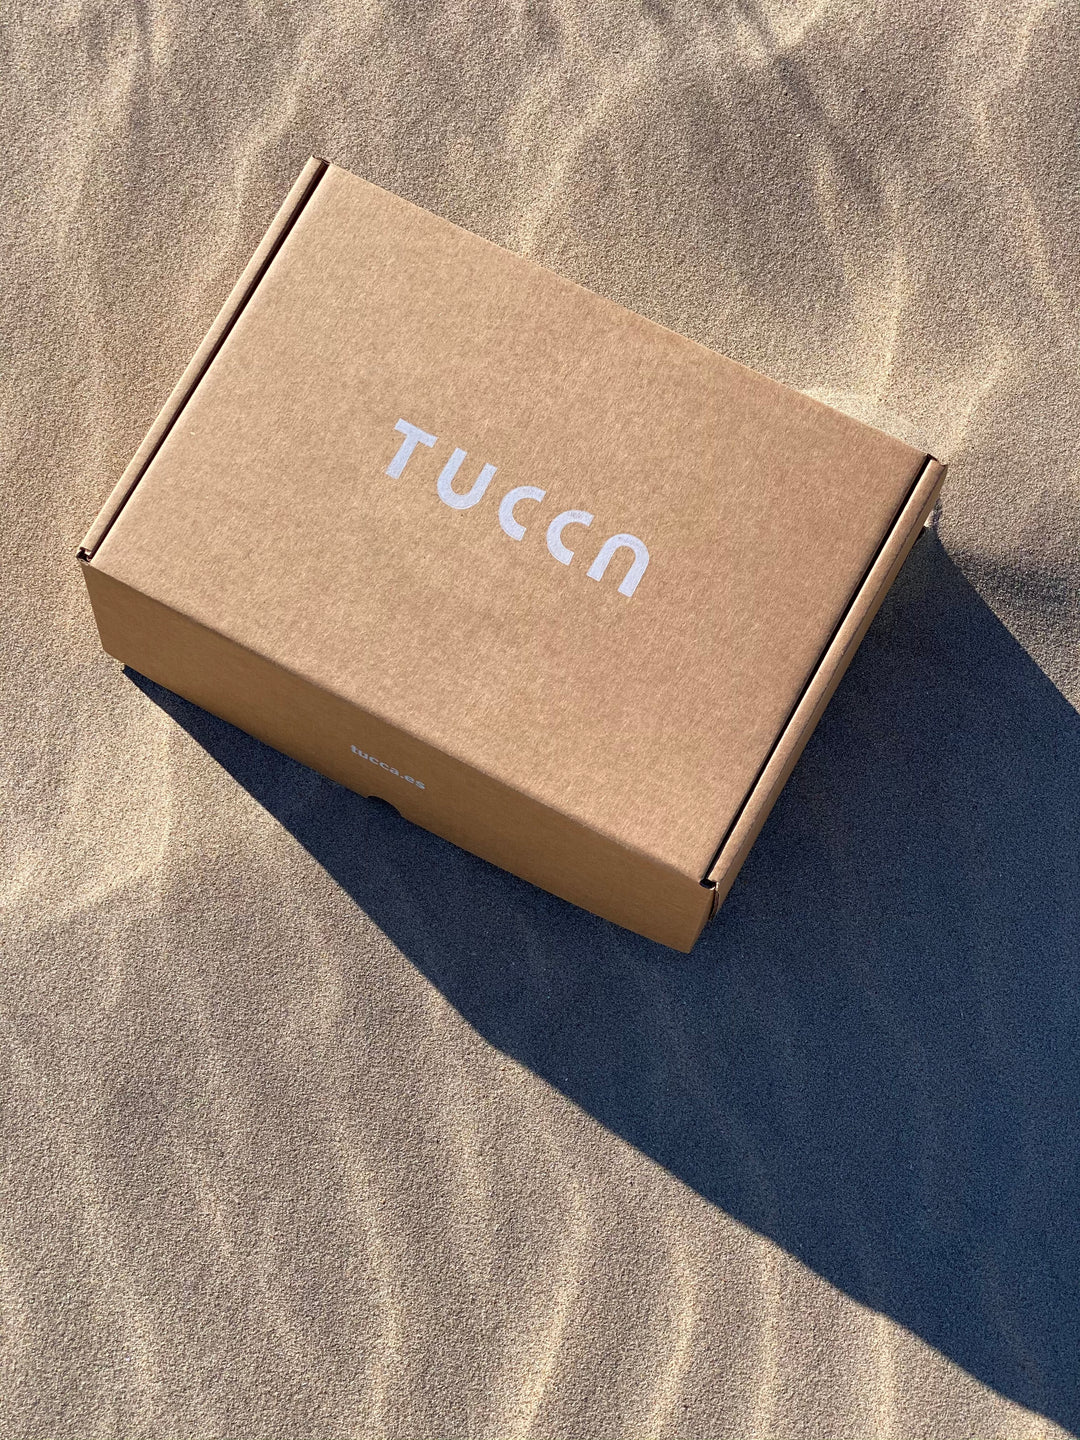 Beach towel packaging on the sand of the beach. No plastic packaging and natural materials